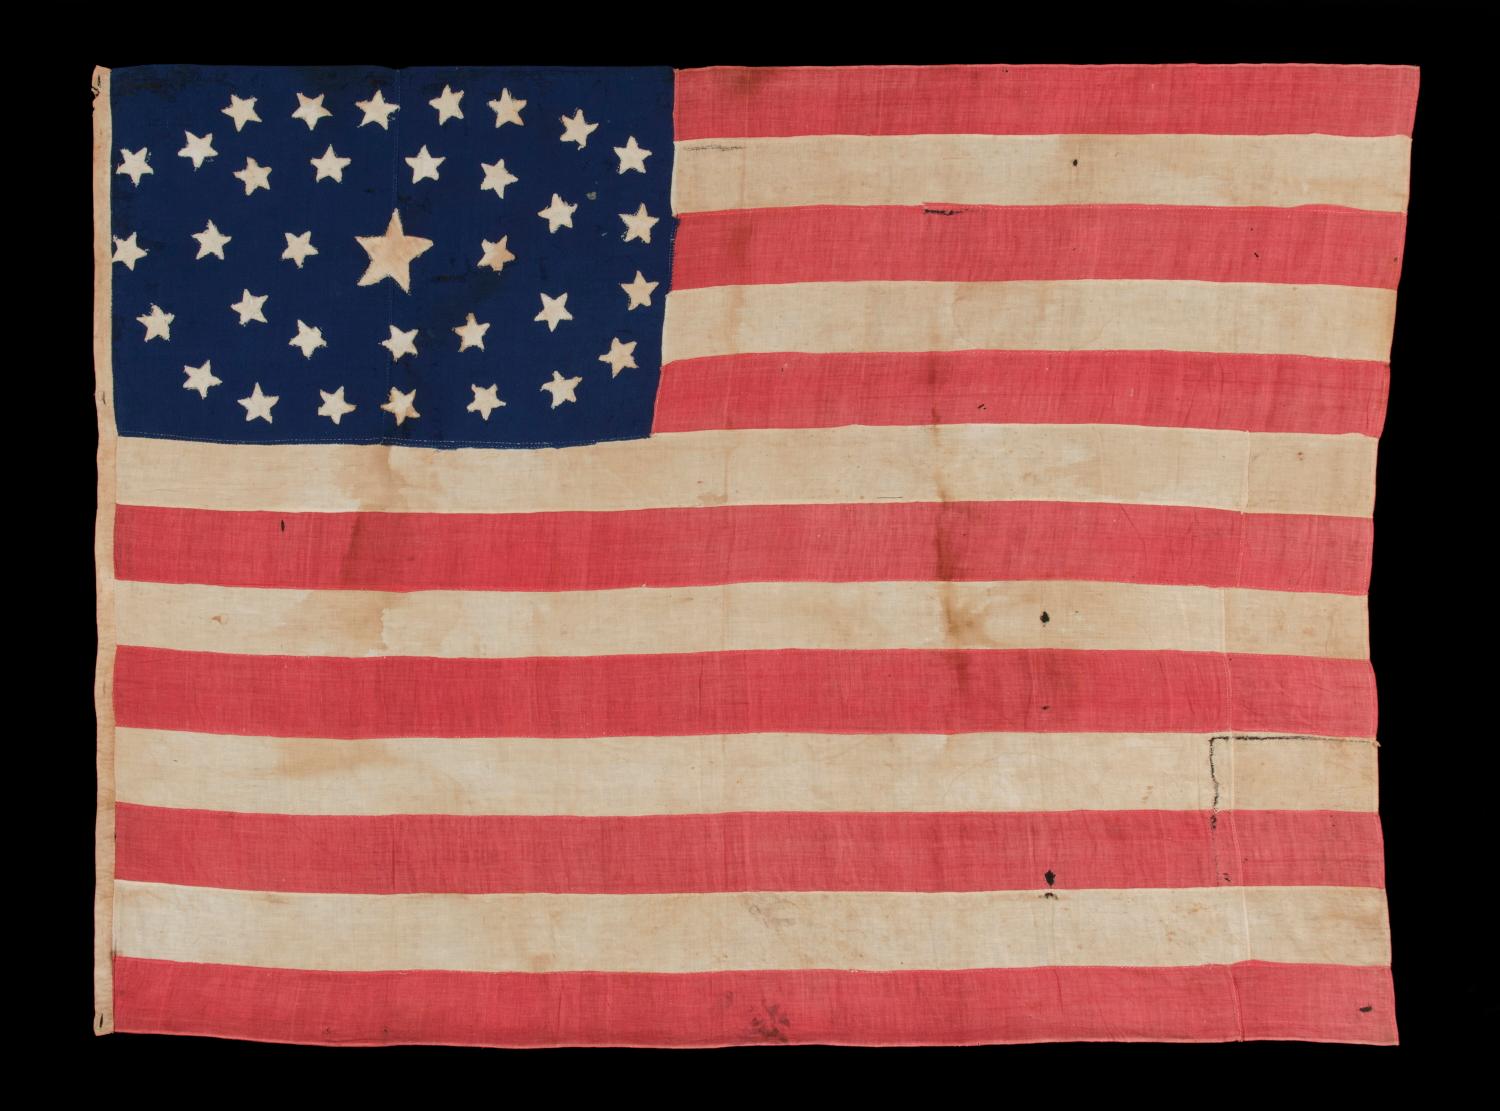 34 STARS IN AN OUTSTANDING OVAL MEDALLION CONFIGURATION, ON A NARROW CANTON THAT RESTS ON THE 6TH STRIPE, ON A HOMEMADE, ANTIQUE AMERICAN FLAG OF THE CIVIL WAR PERIOD, ENTIRELY HAND-SEWN, 1861-1863, KANSAS STATEHOOD:

34 star American national flag